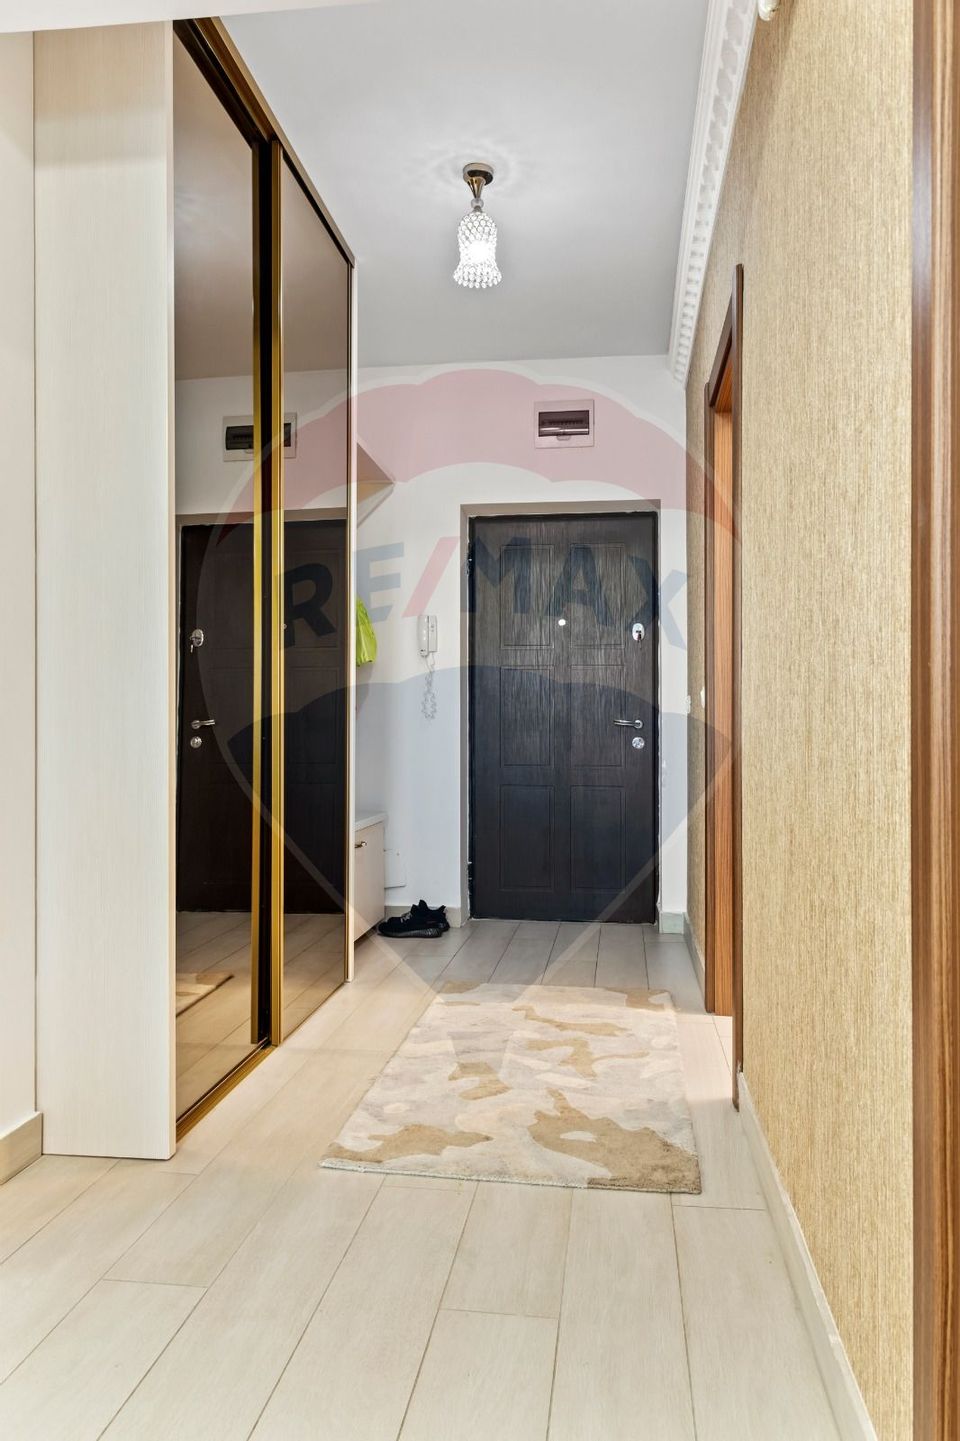 Three-room apartment + parking space + stall in Cora Pantelimon area